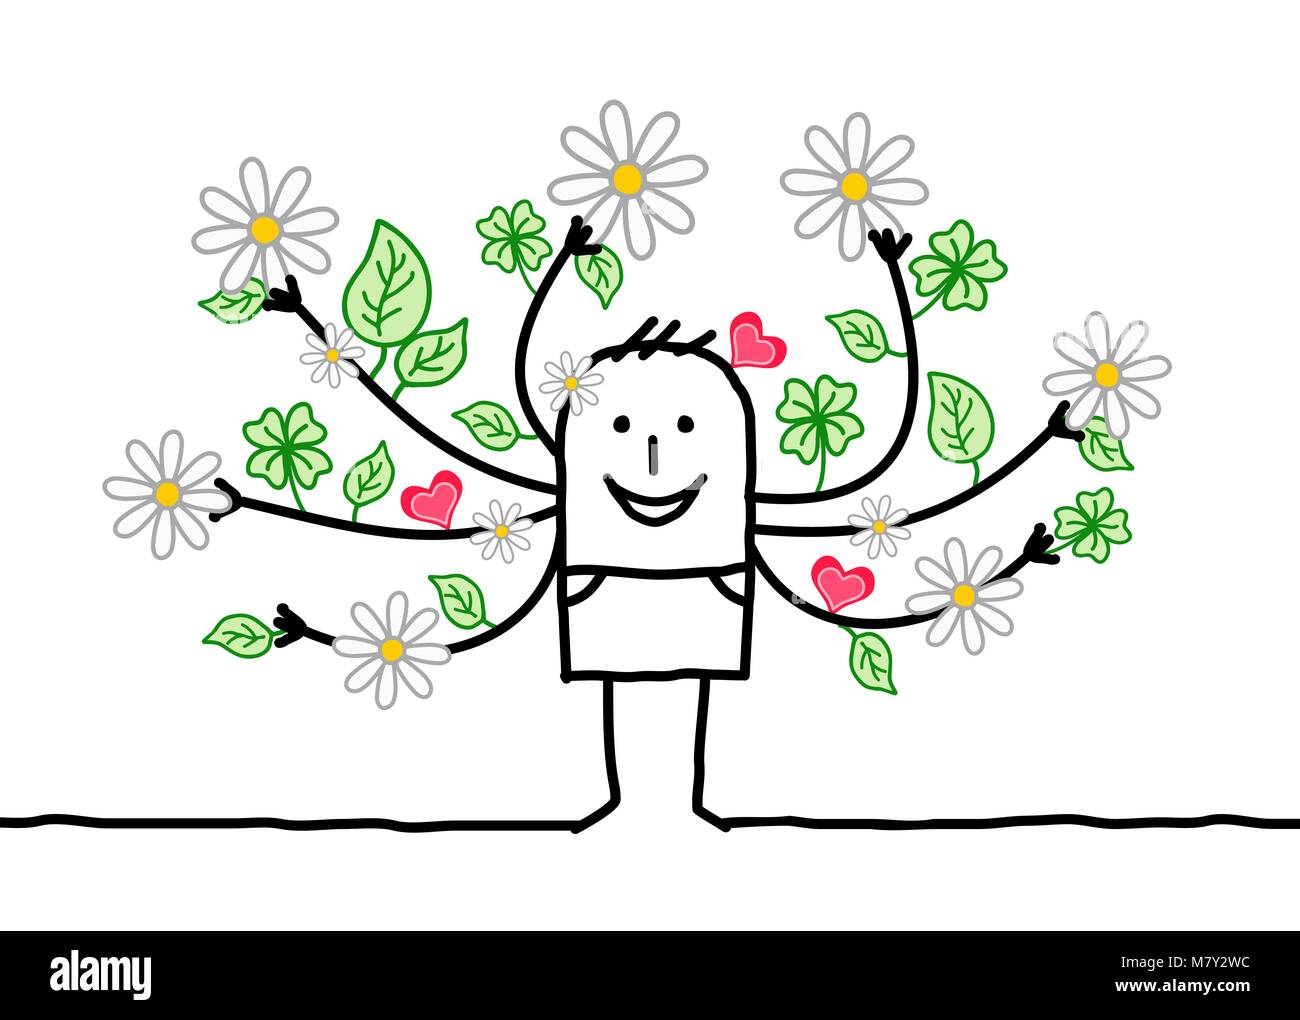 Cartoon Spring Man with Flowering Arms Stock Vector